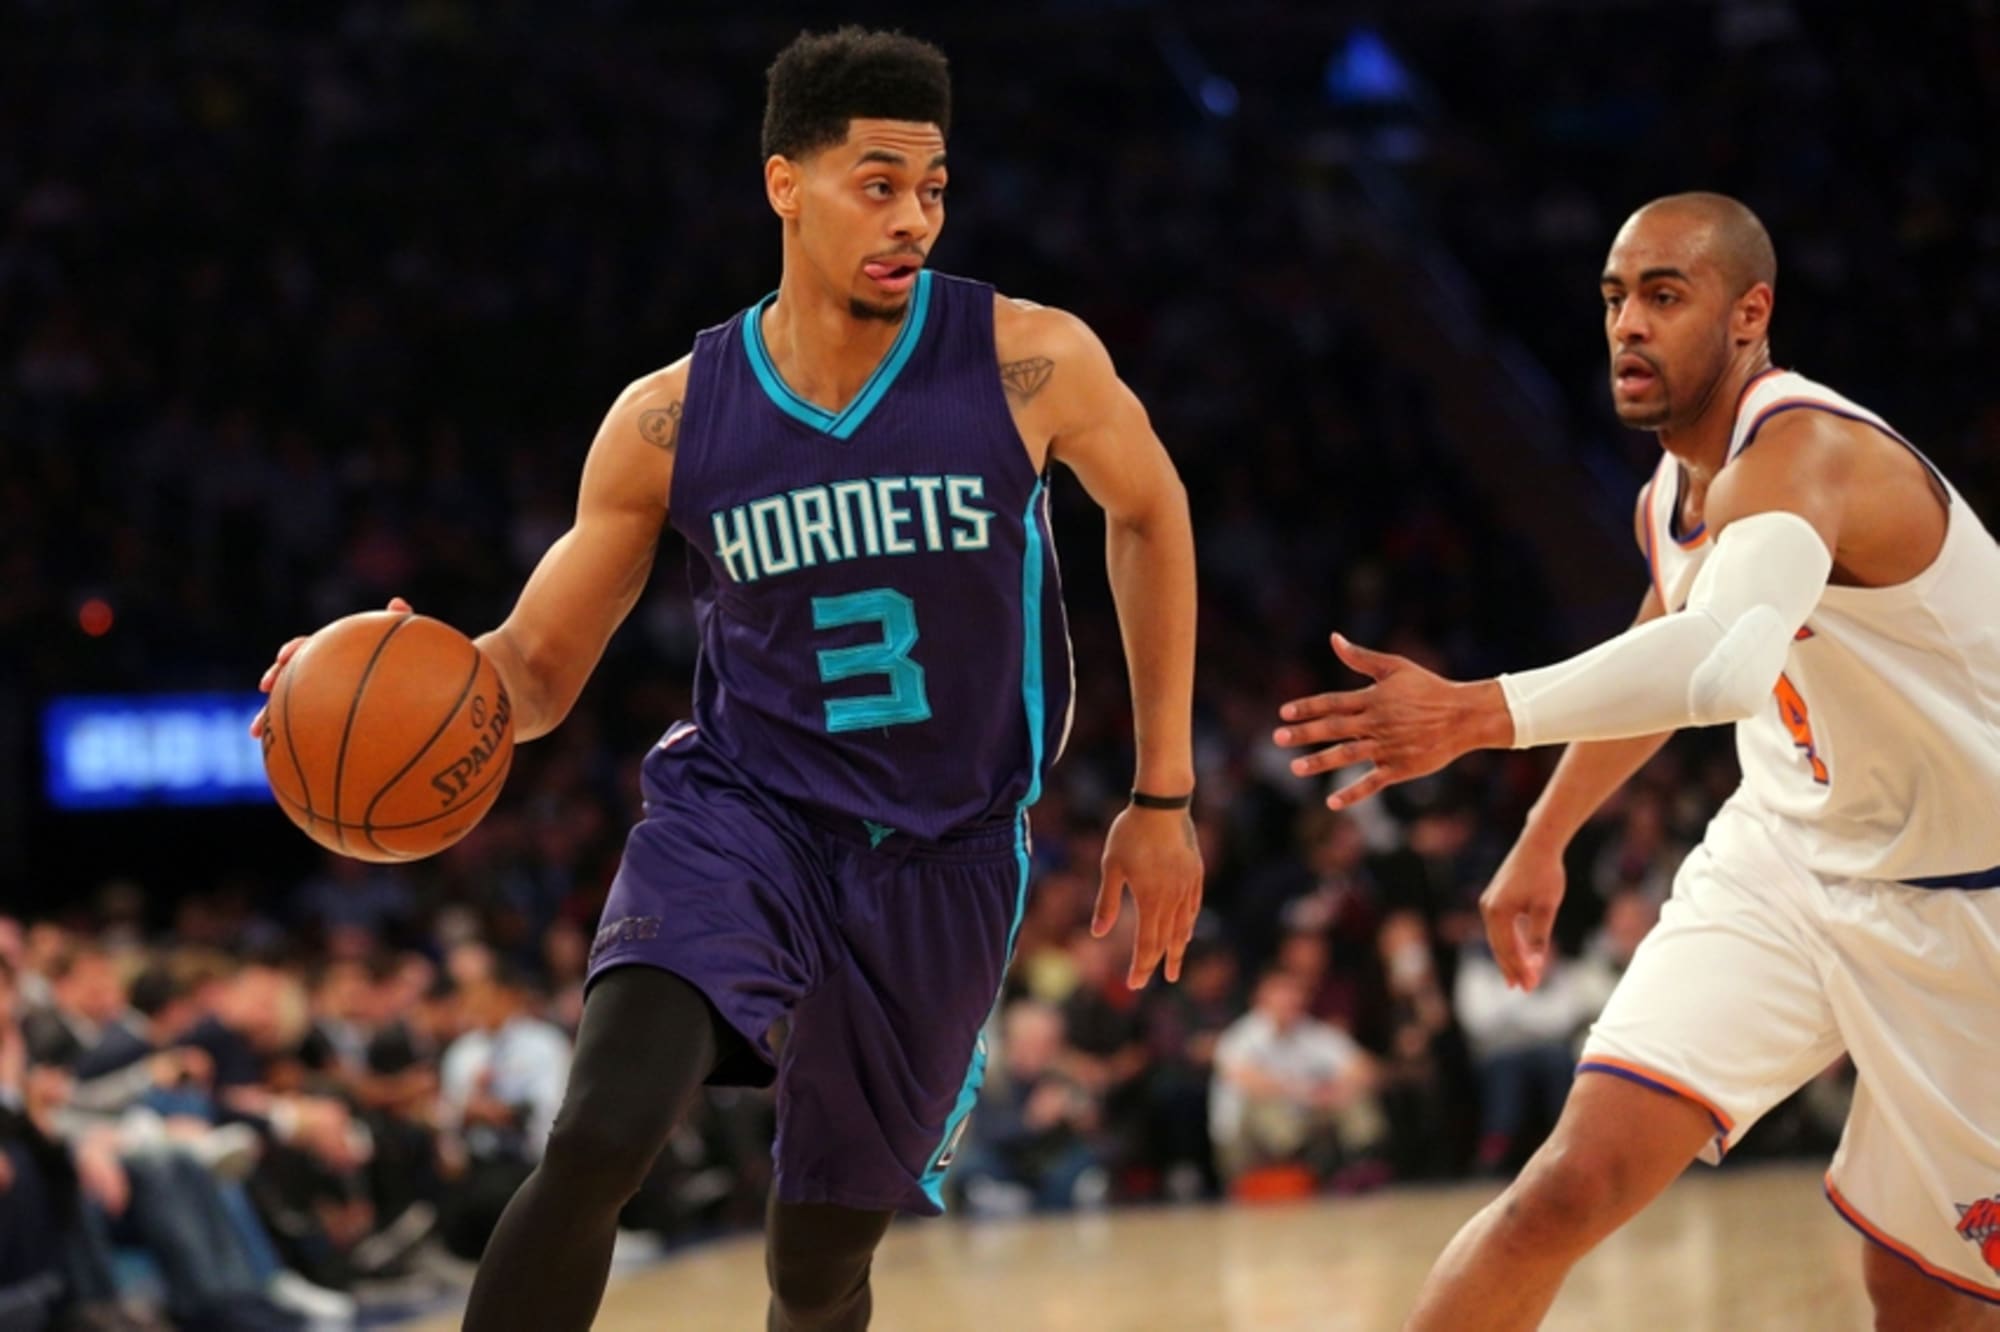 Charlotte Hornets: Jeremy Lamb most likely player to be traded?